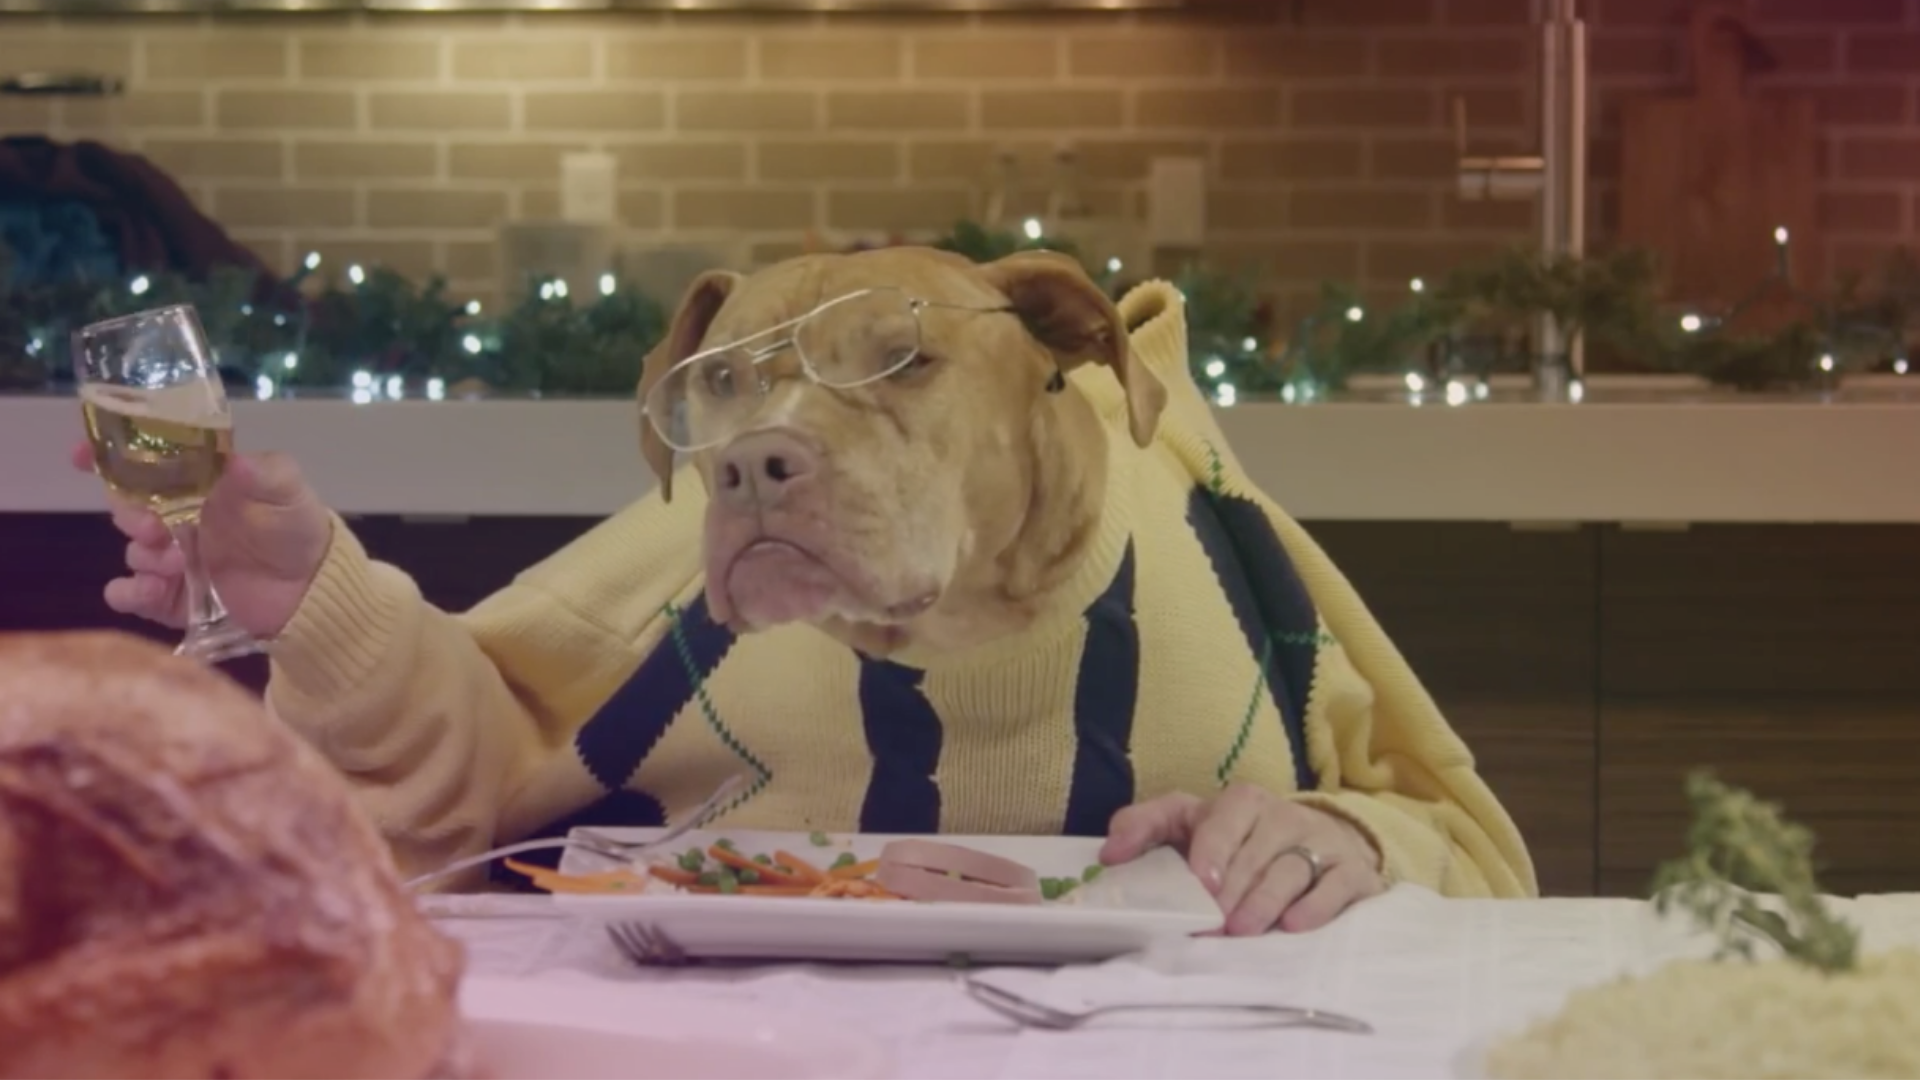 5 As-seen-on-TikTok dog friendly recipes of your fave dishes (for your pup)